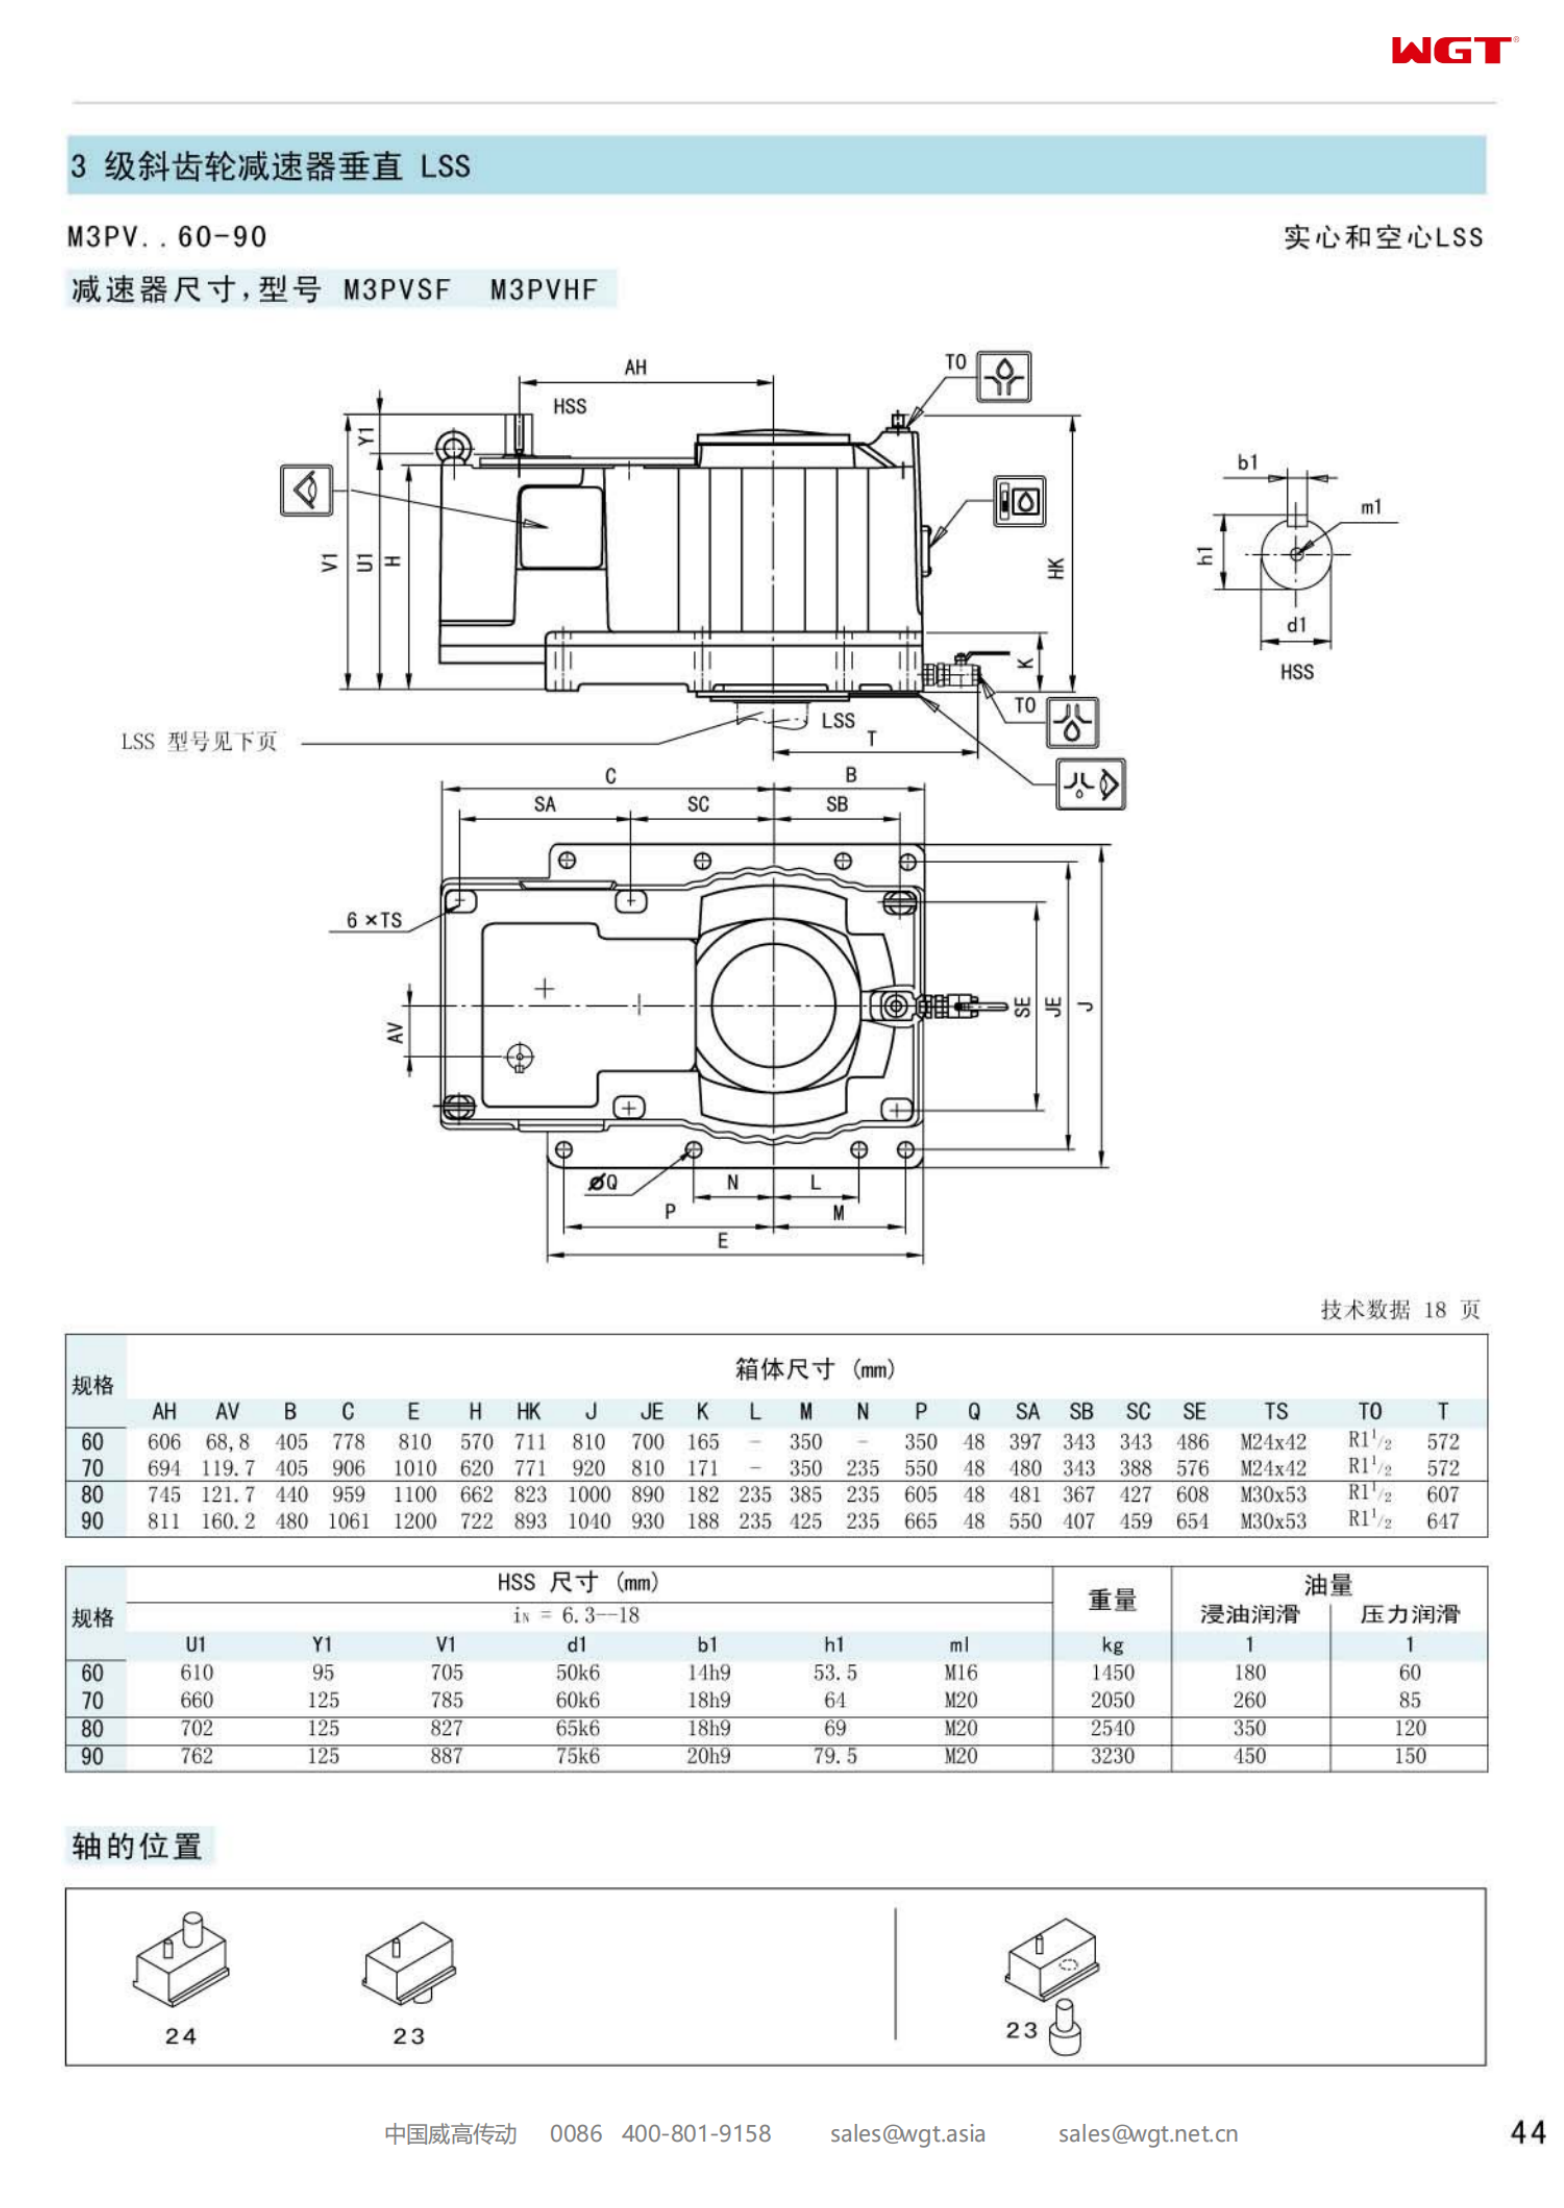 M3PVSF80 Replace_SEW_M_Series Gearbox